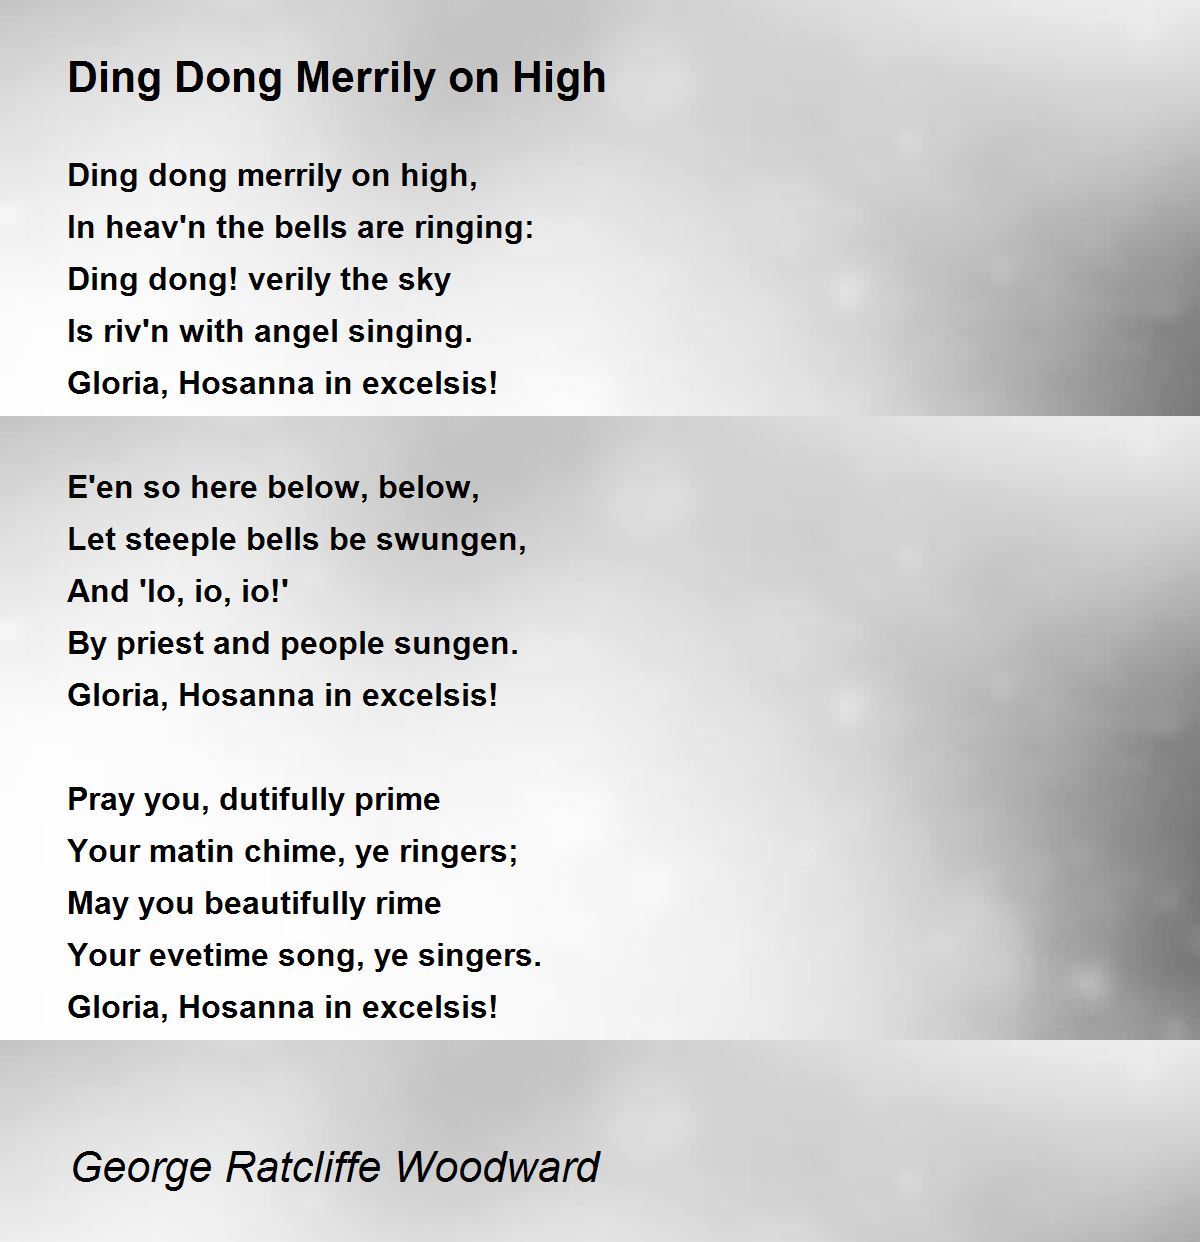 Ding Dong Merrily on a High: the Lyrics and the Meaning